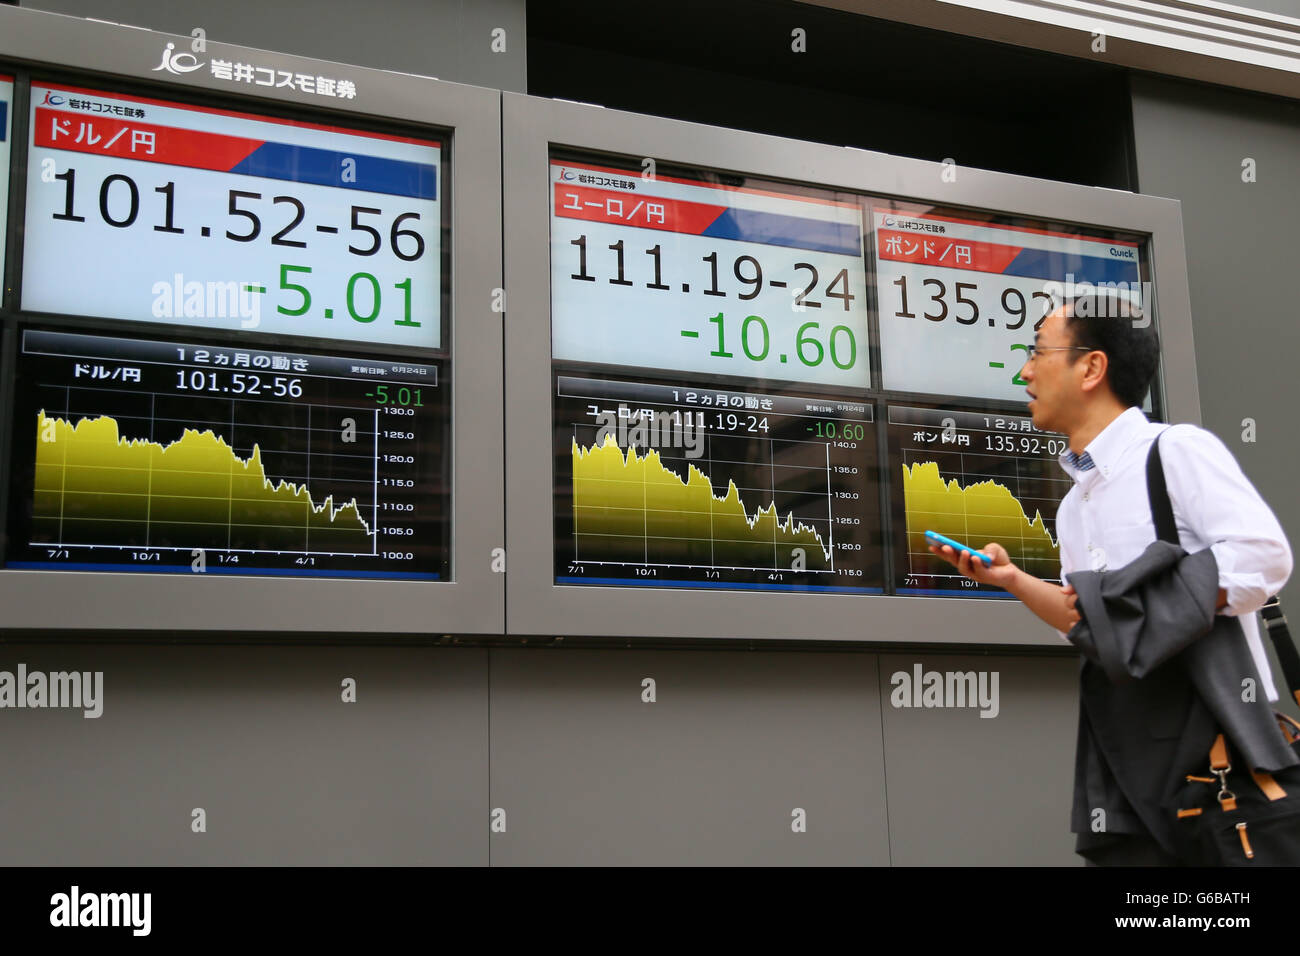 A trading board shows that exchange rates of Japanese yen against dollar, left, and euro, British pound on June 24, 2016 in Tokyo, Japan. As it became apparent that British voters would opt to leave the EU, markets across the globe began to tumble. The Nikkei index in Japan fell by over 1000 points, its largest one day drop since the Great East Japan Earthquake and Tsunami of March 2011. The pound also tumbled by over 10 percent against japanese yen. © Yohei Osada/AFLO/Alamy Live News Stock Photo